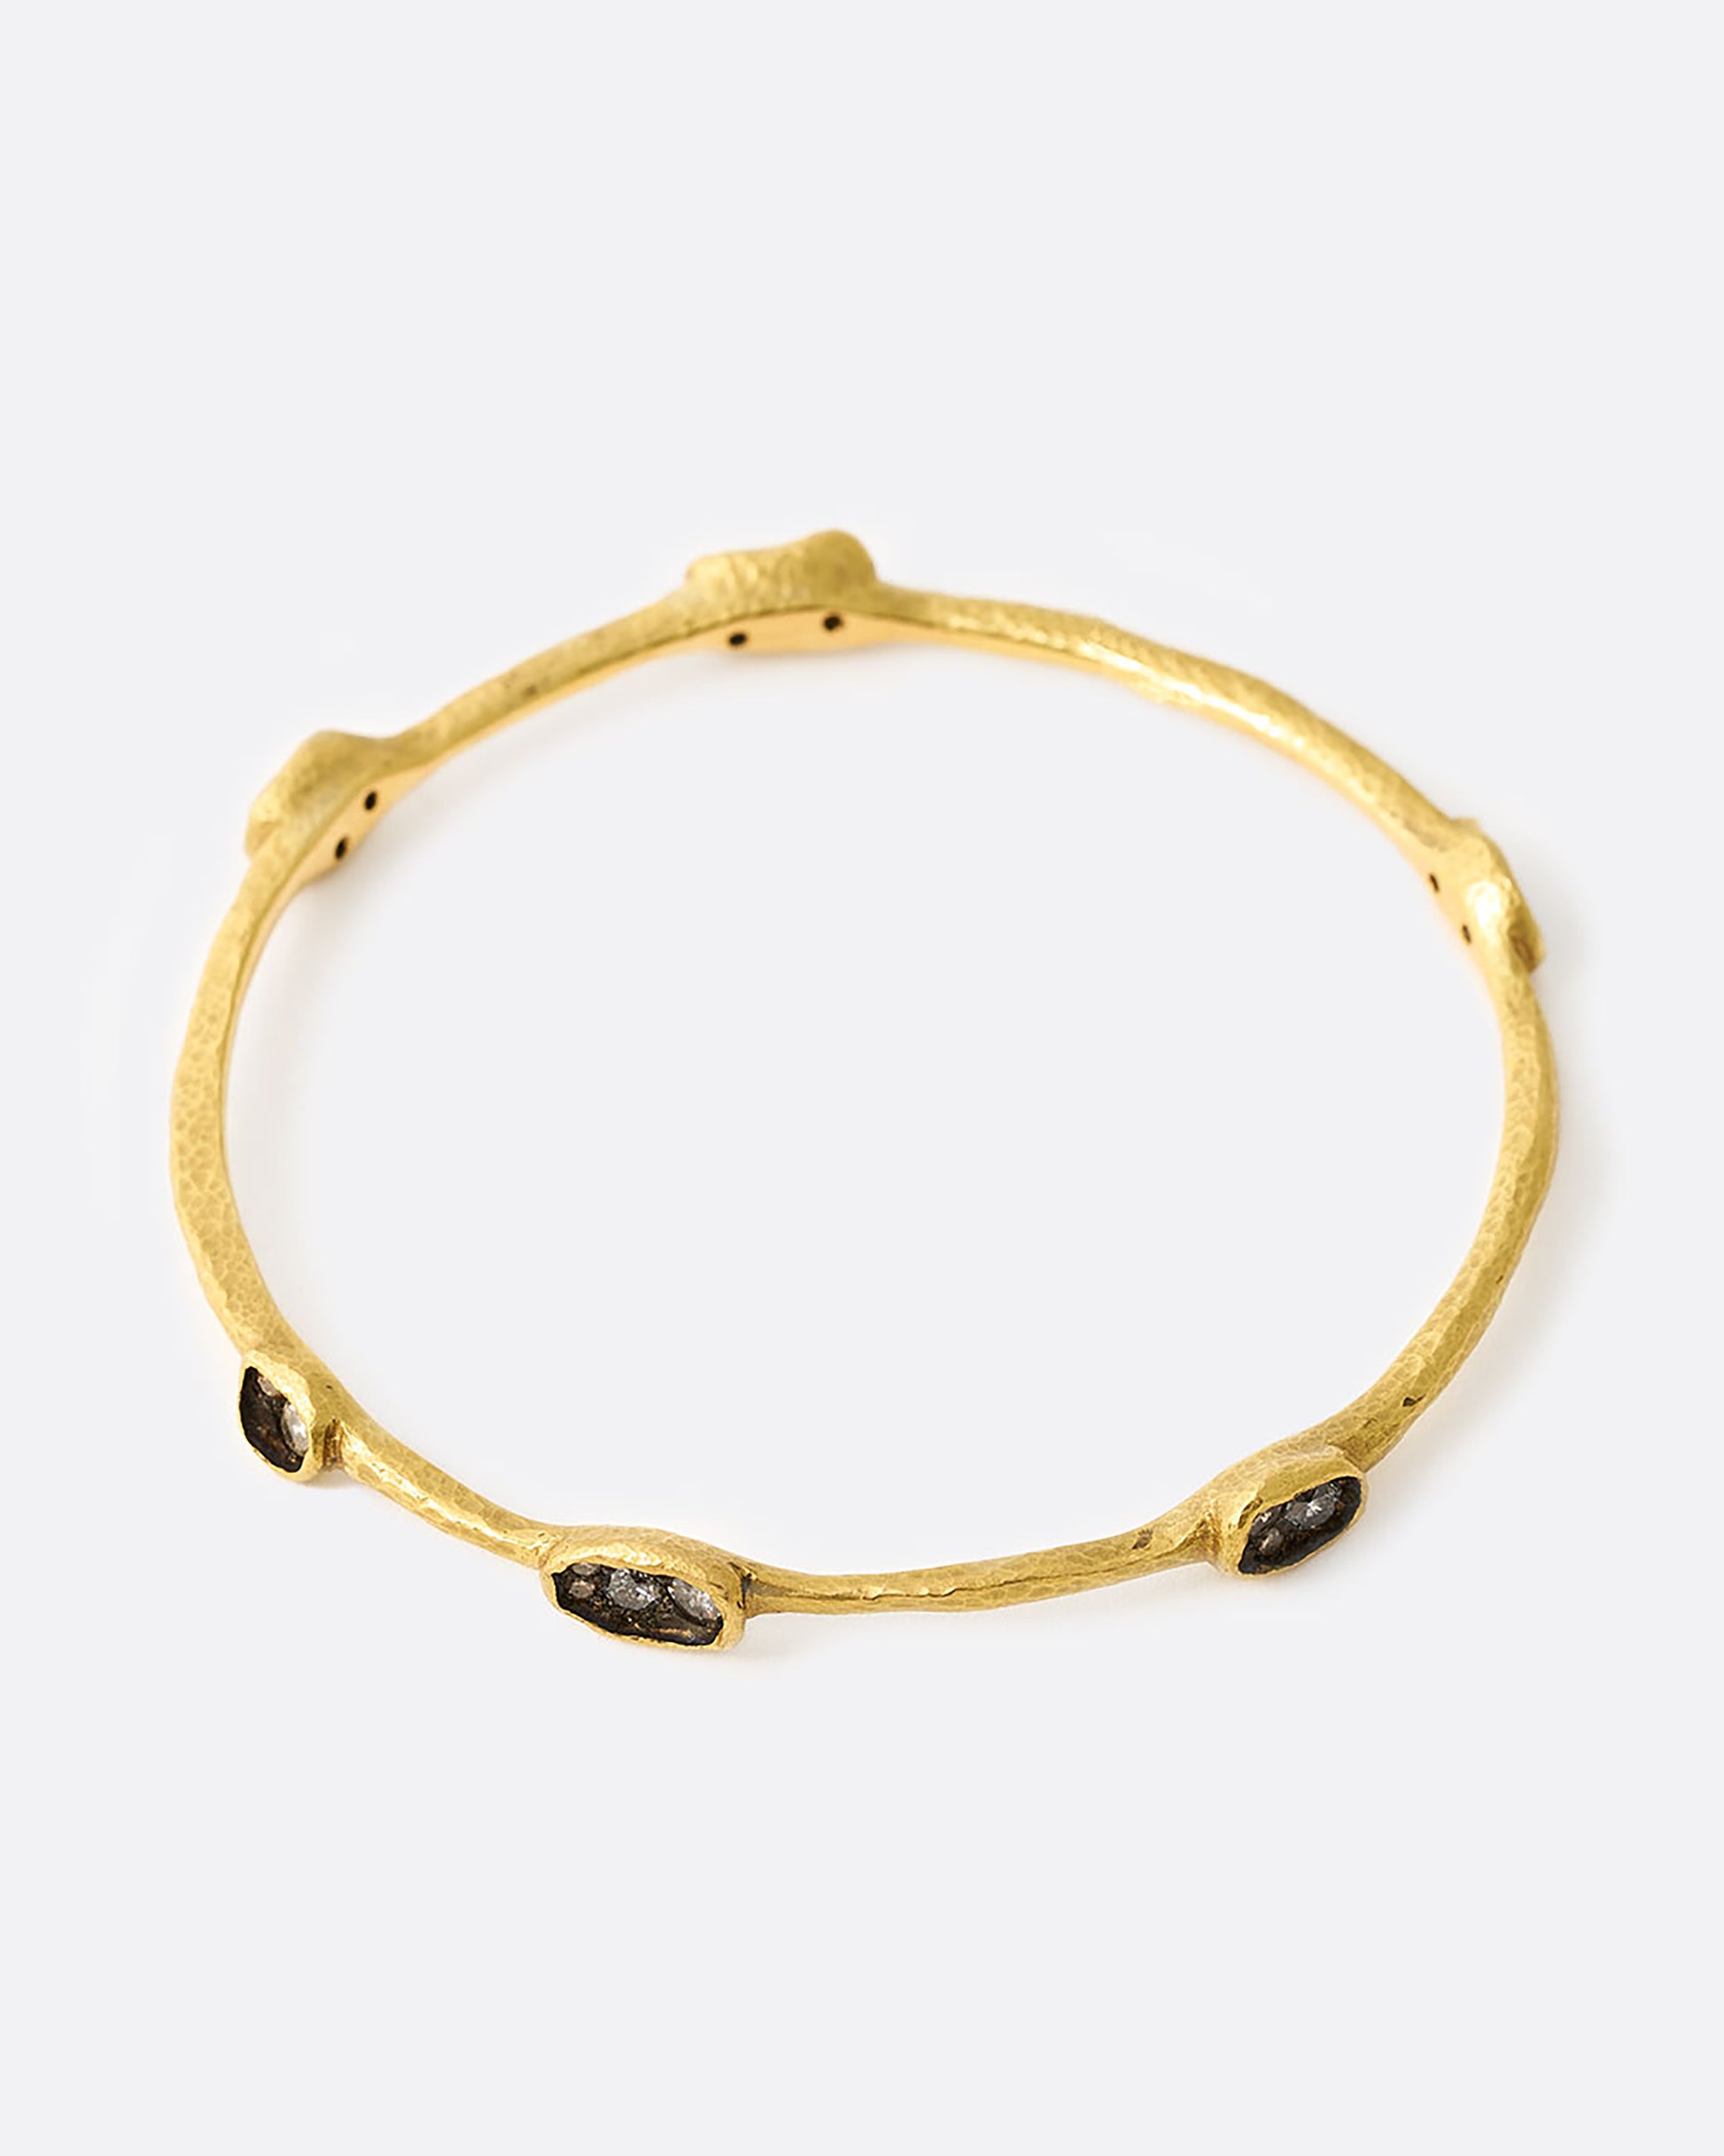 Yellow gold bangle bracelet with diamonds in oval settings, shown from the top.